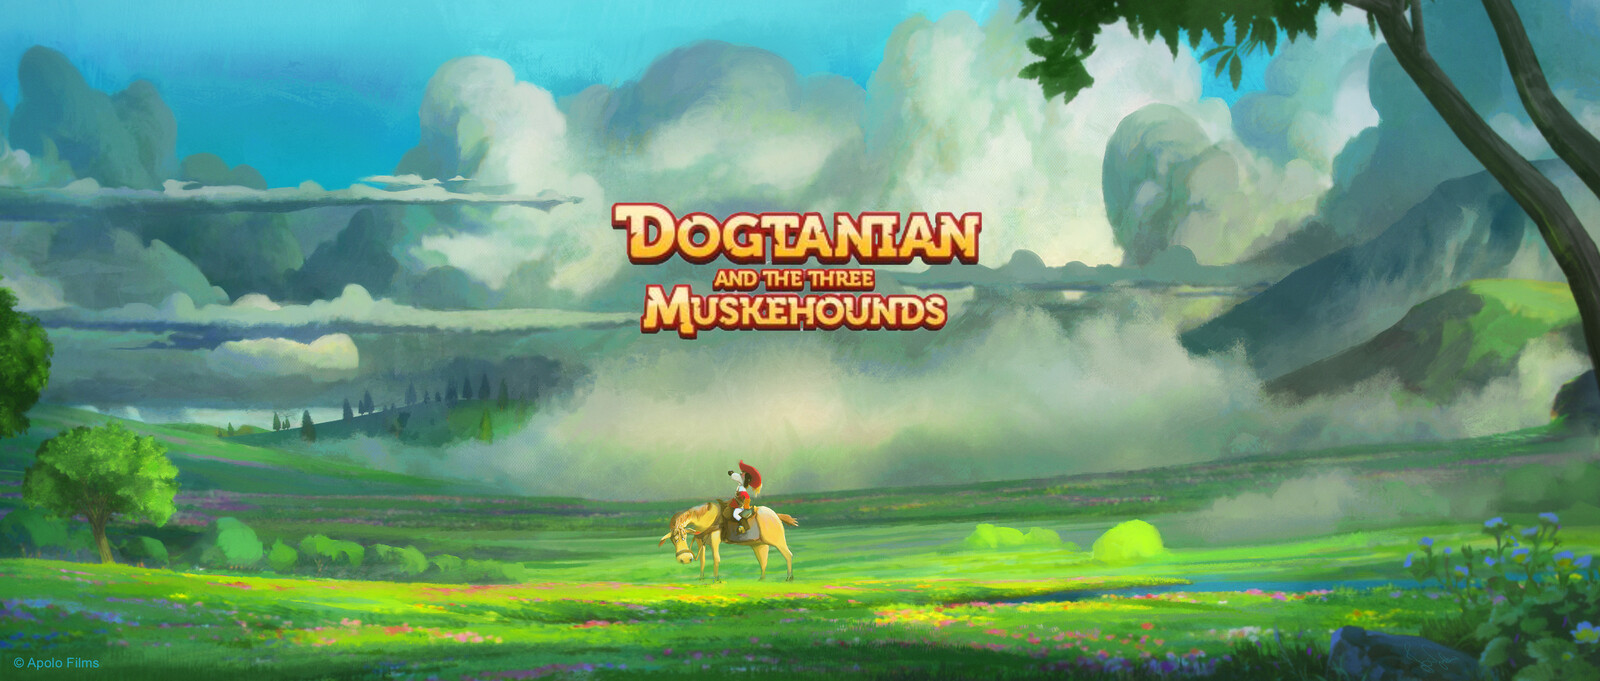 Dogtanian and the Muskehounds - 1st Act